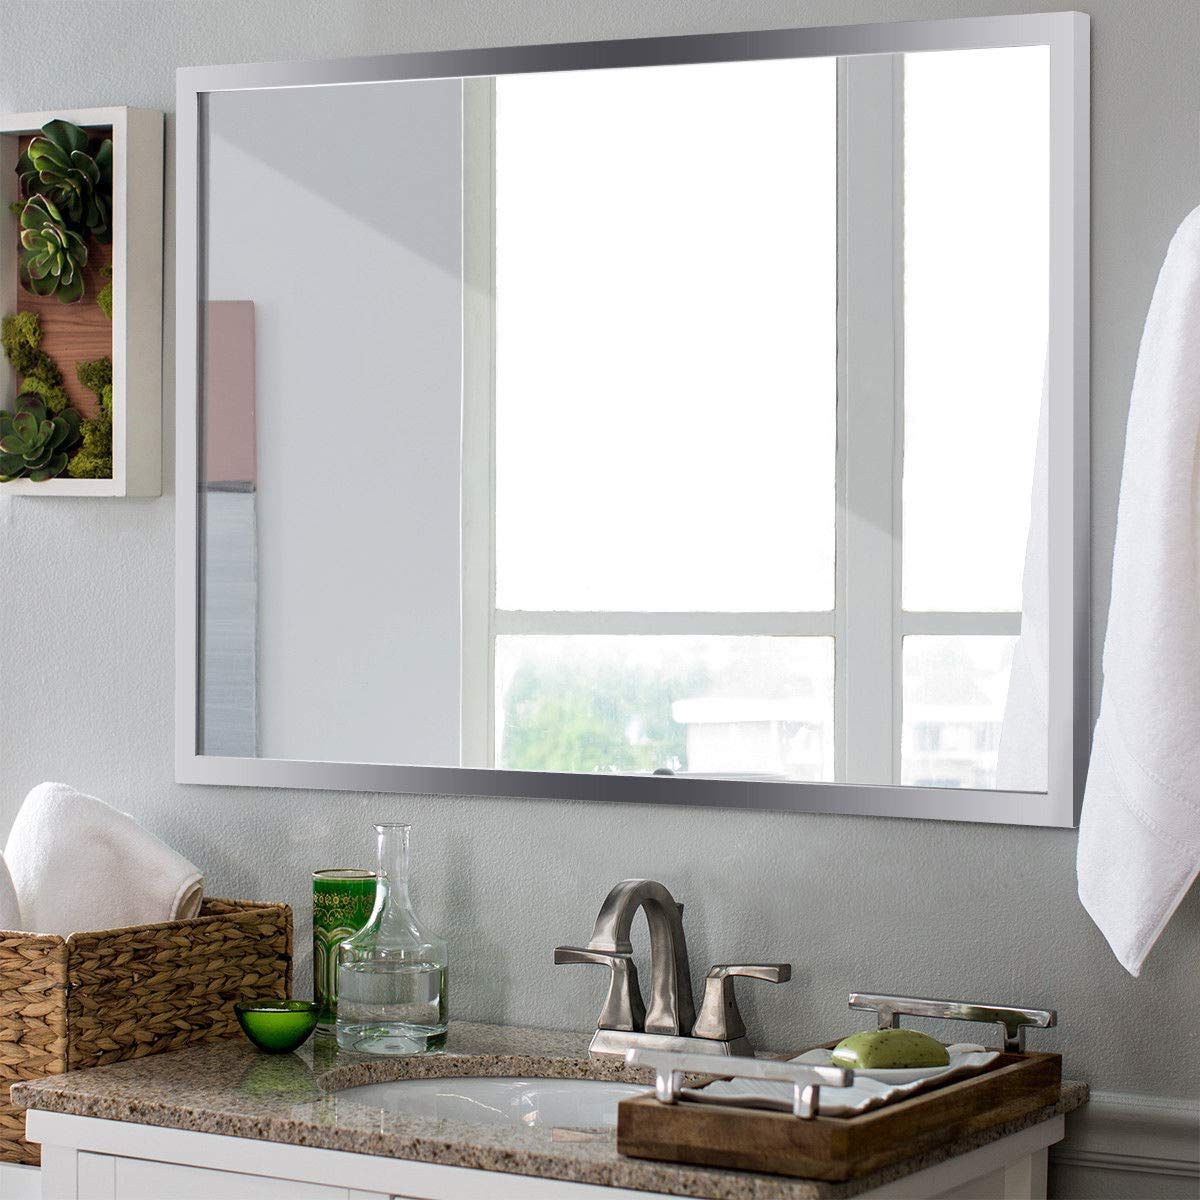 Stainless Steel Wall Mirrors In Well Known Tangkula Wall Mirror Rectangular, Bathroom Simple Modern Stainless Steel  Frame Mirror, Aluminum Backed Floating Glass Vanity Bedroom Hangs  Horizontal (View 6 of 20)